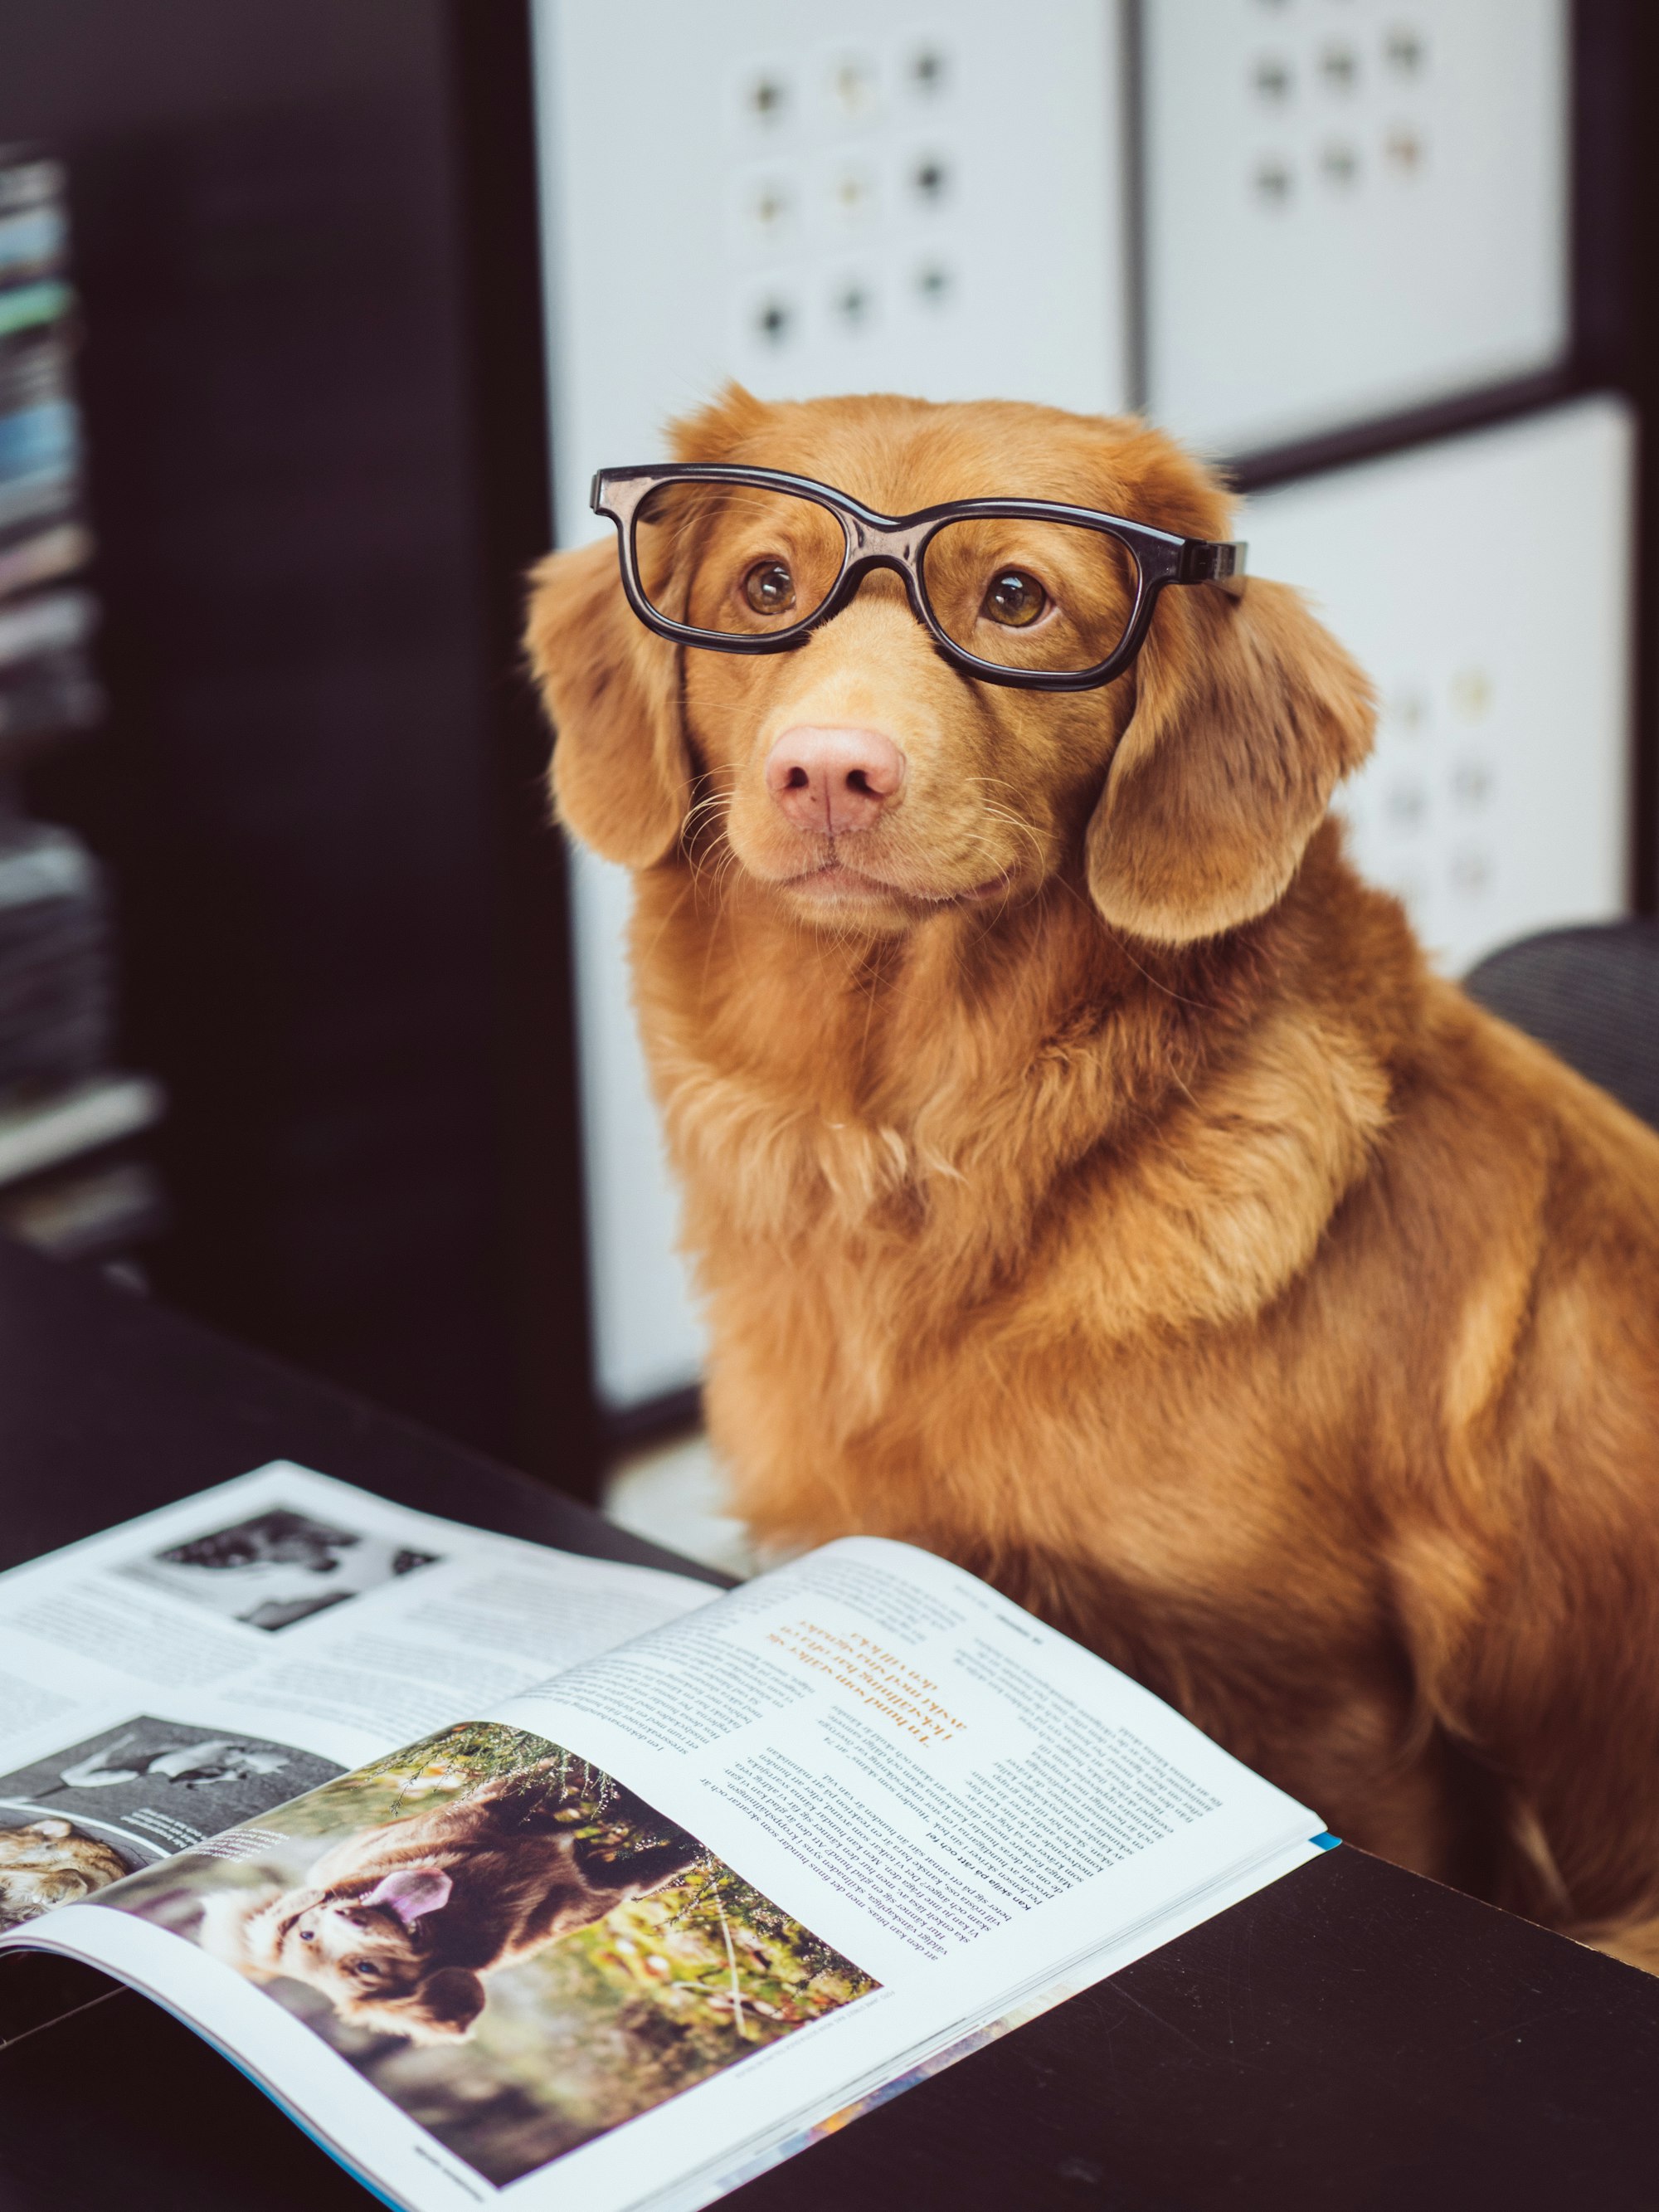 A golden retriever wearing glasses looks at the camera, while a book open to a page with a picture of a dog sits in front of him.